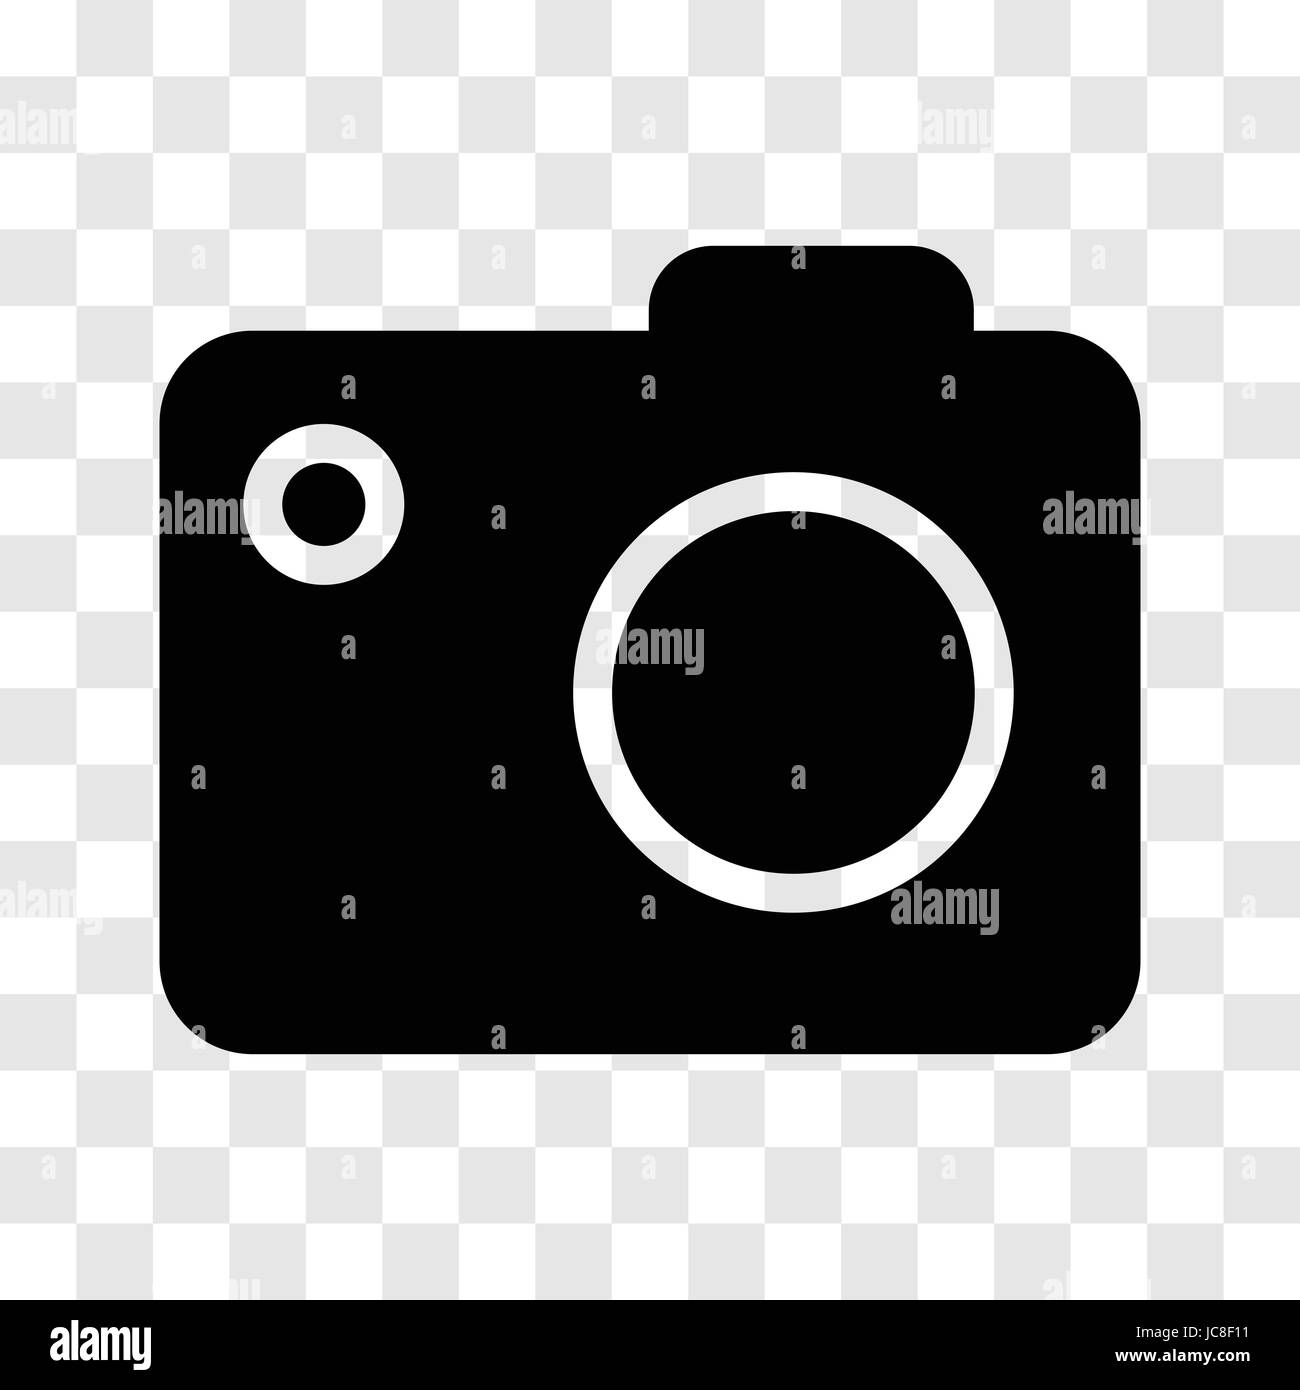 Camera icon, iconic symbol on transparency grid.  Vector Iconic Design. Stock Vector